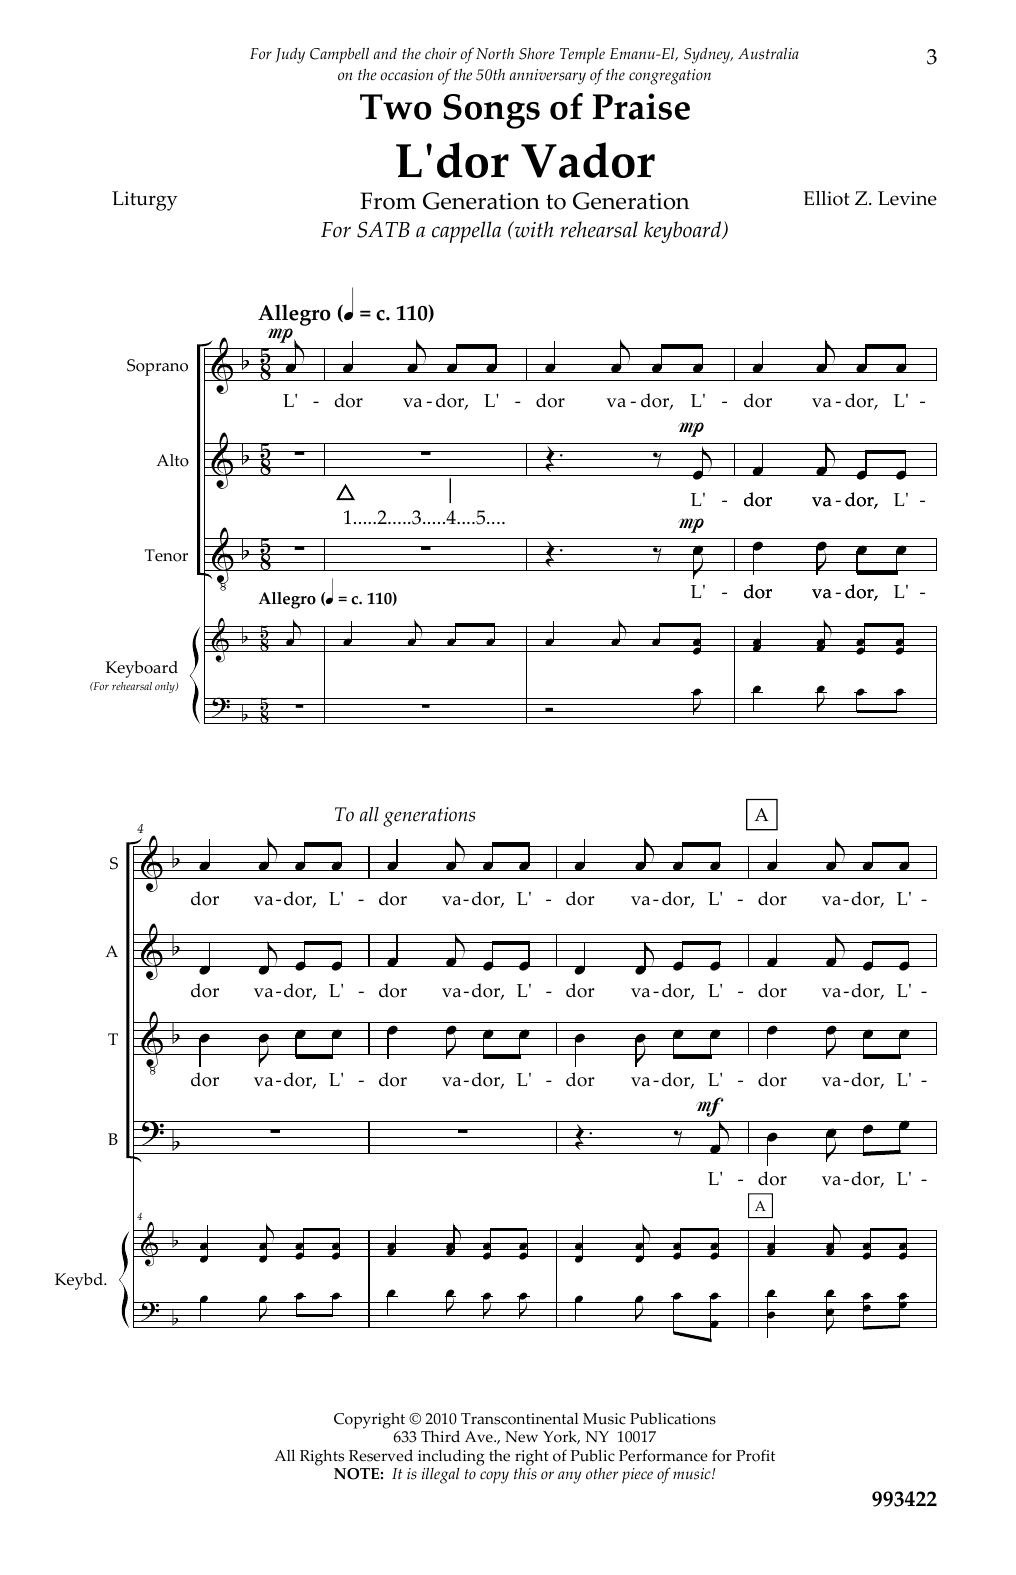 Download Elliot Z. Levine Two Songs Of Praise: L'dor Vador And Ps Sheet Music